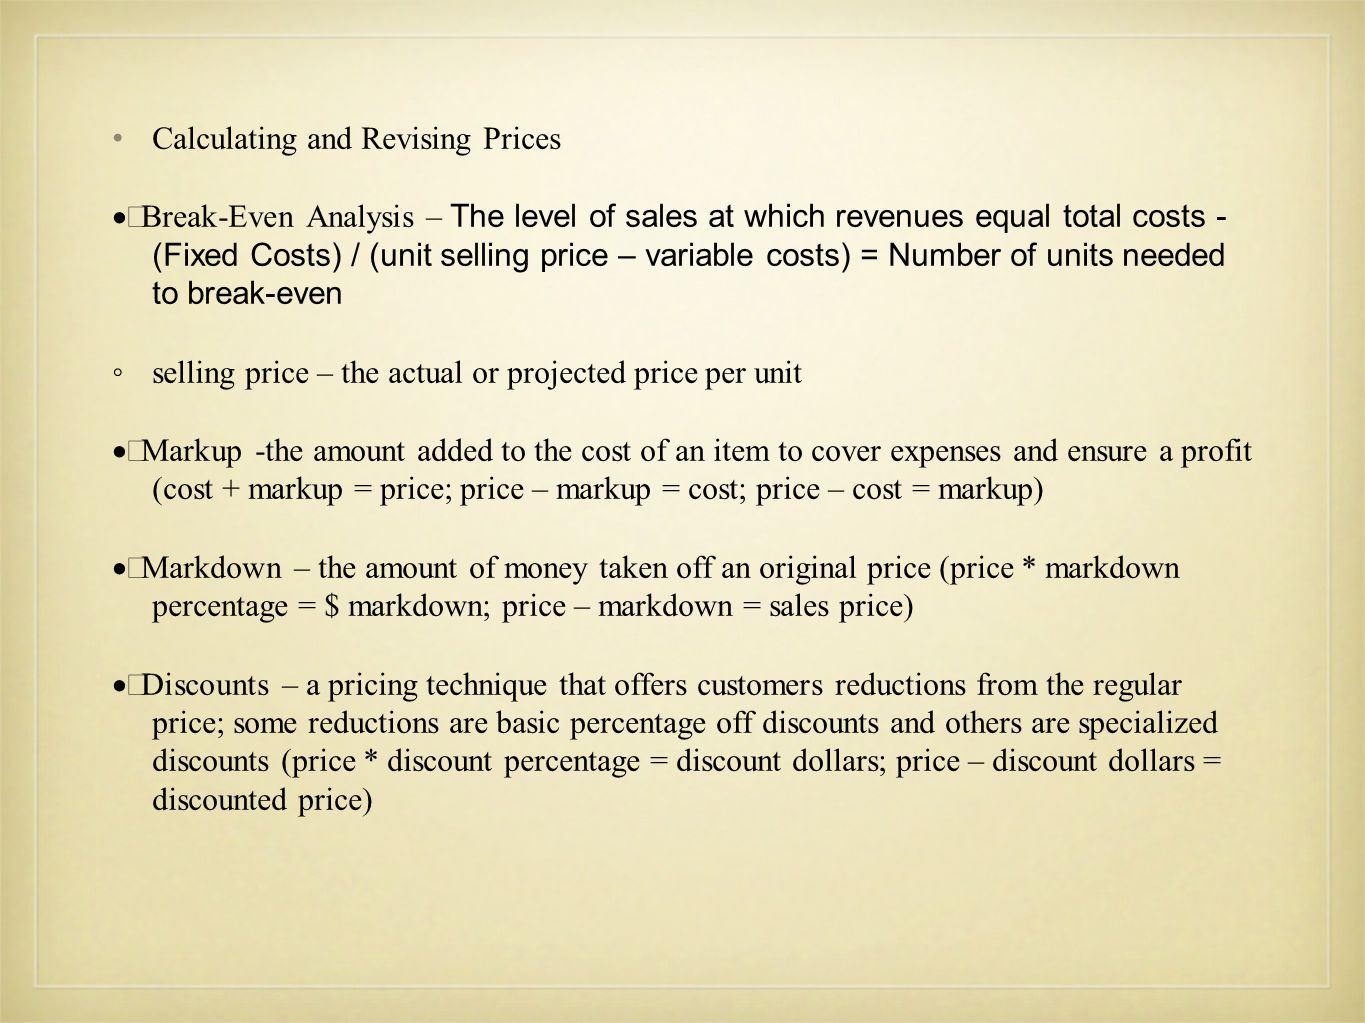 Calculating and Revising Prices